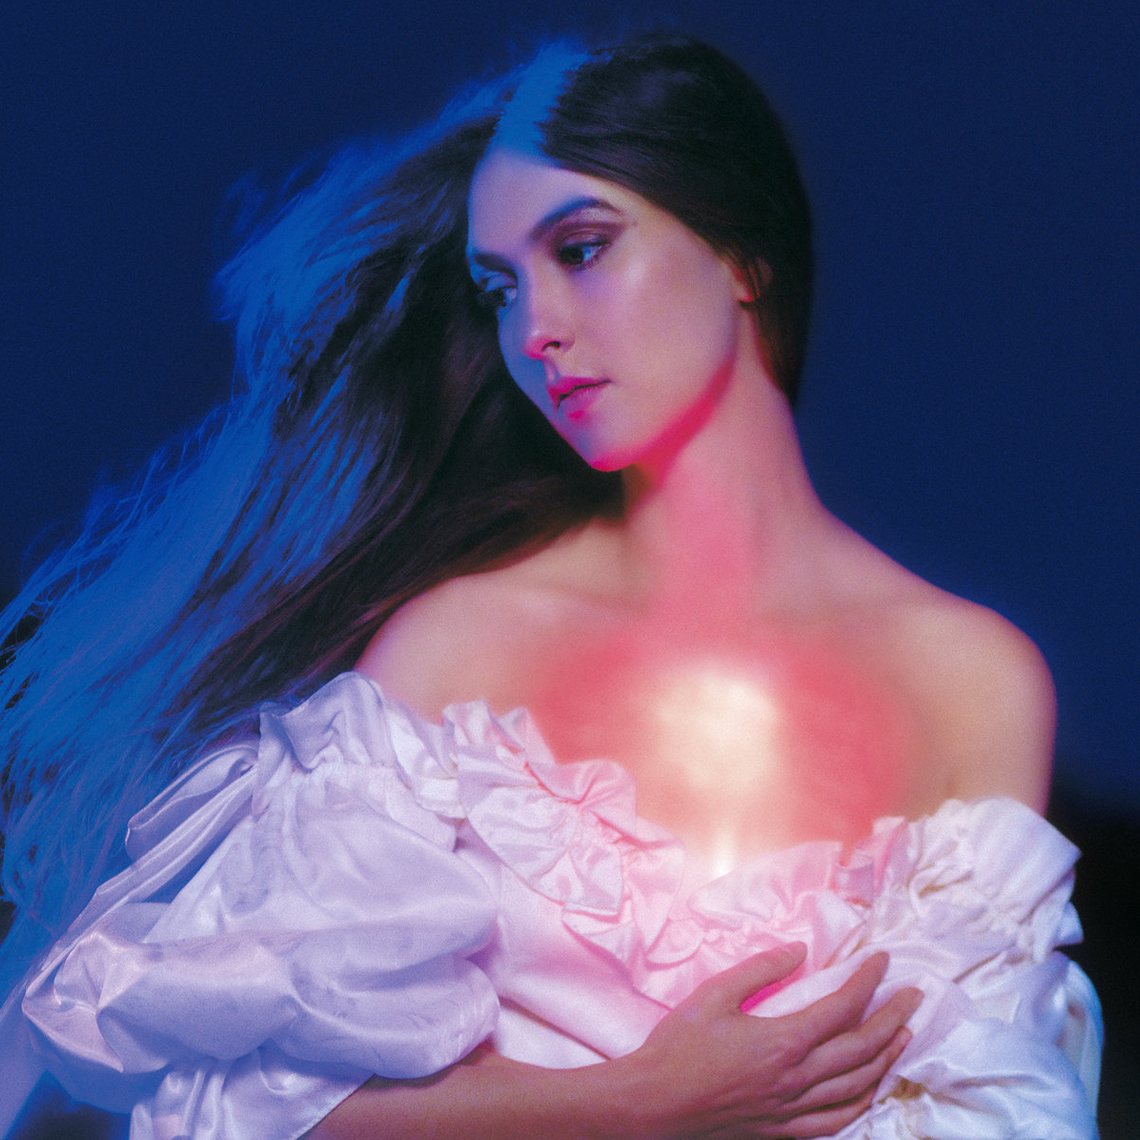 The album cover for Weyes Blood's And in the Darkness, Hearts Aglow